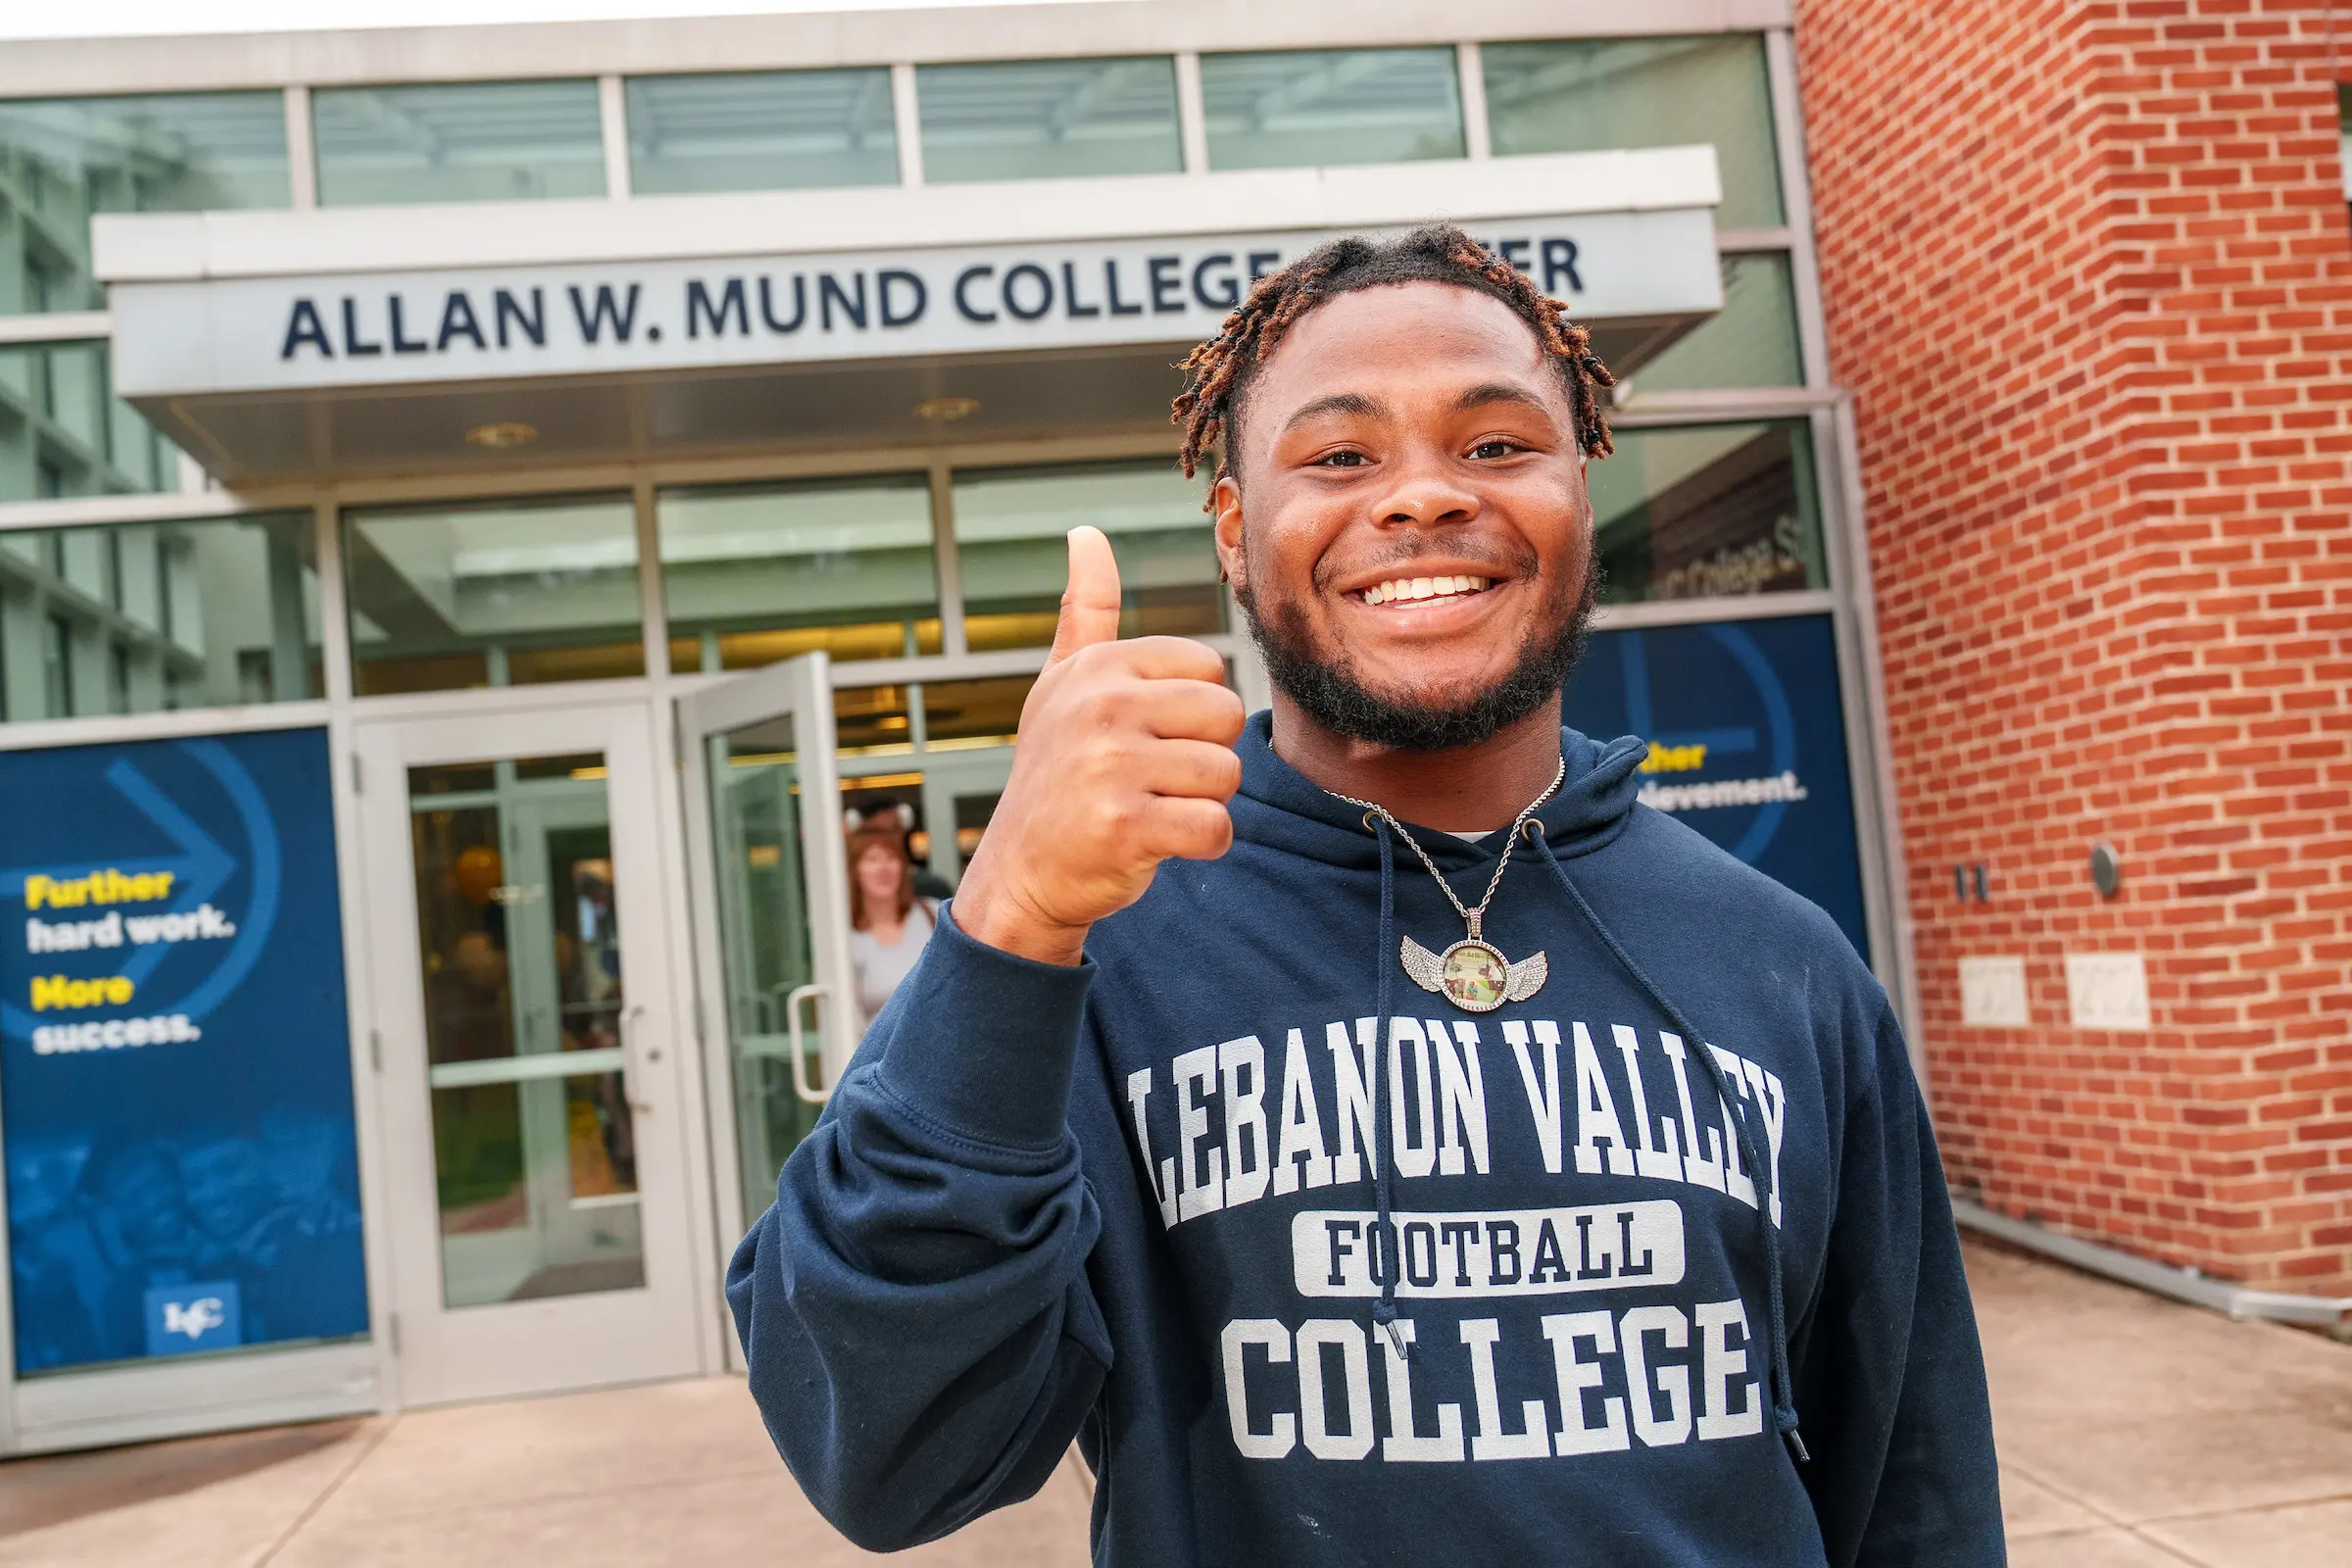 LVC student and football player poses in front of Mund College Center